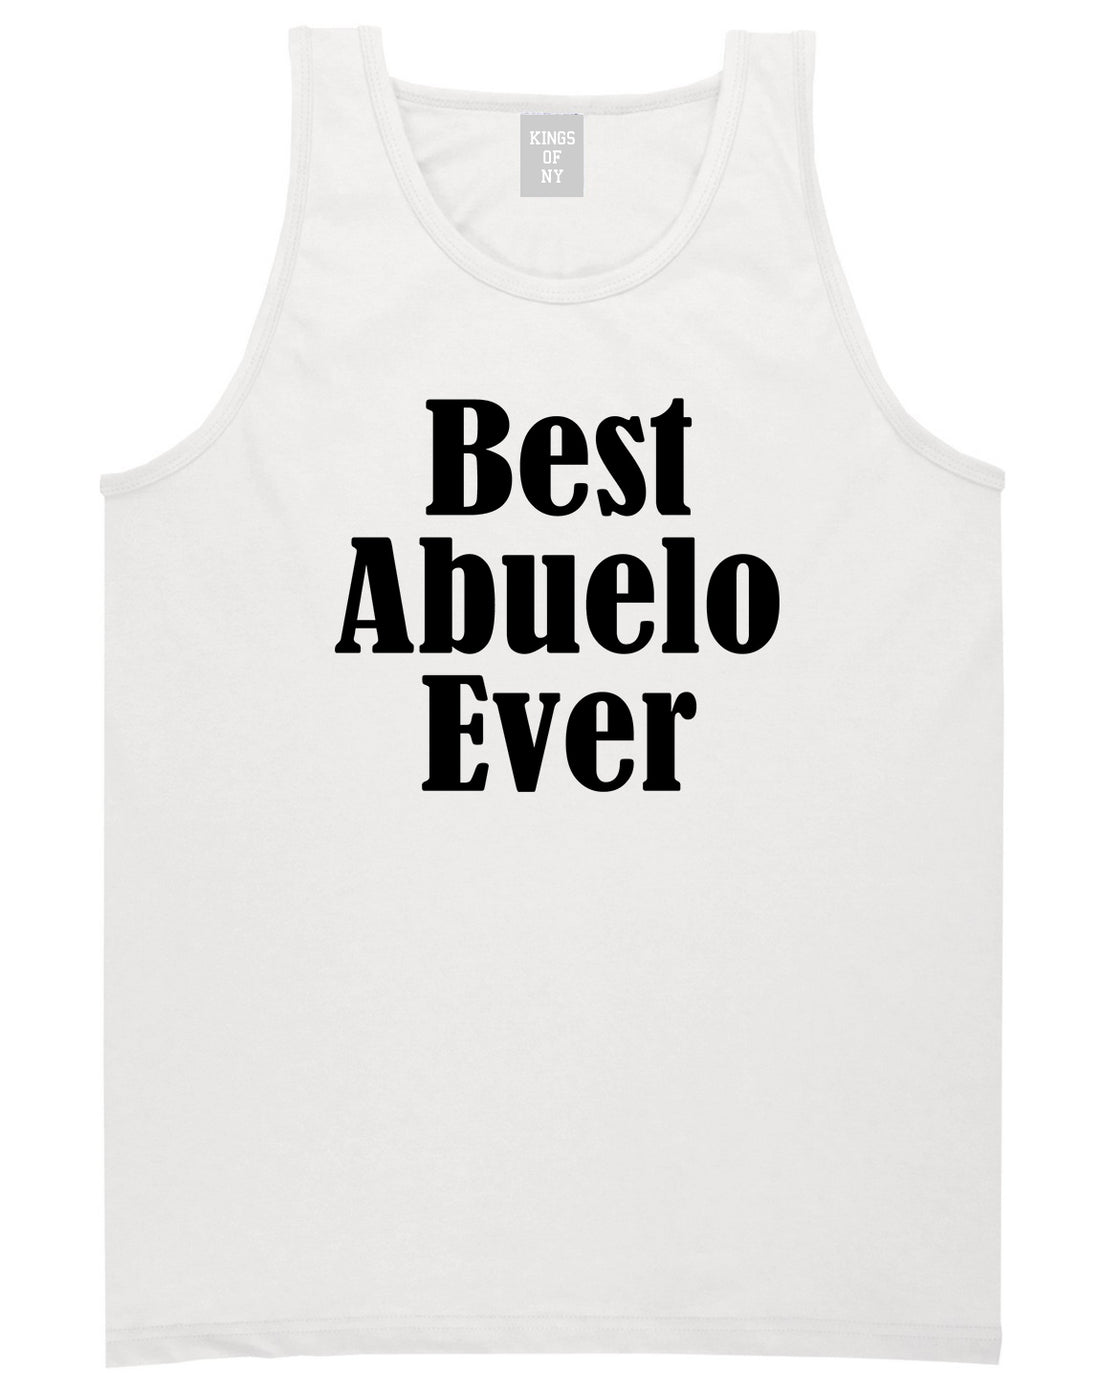 Best Abuelo Ever Grandpa Spanish Fathers Day Mens Tank Top Shirt White by Kings Of NY